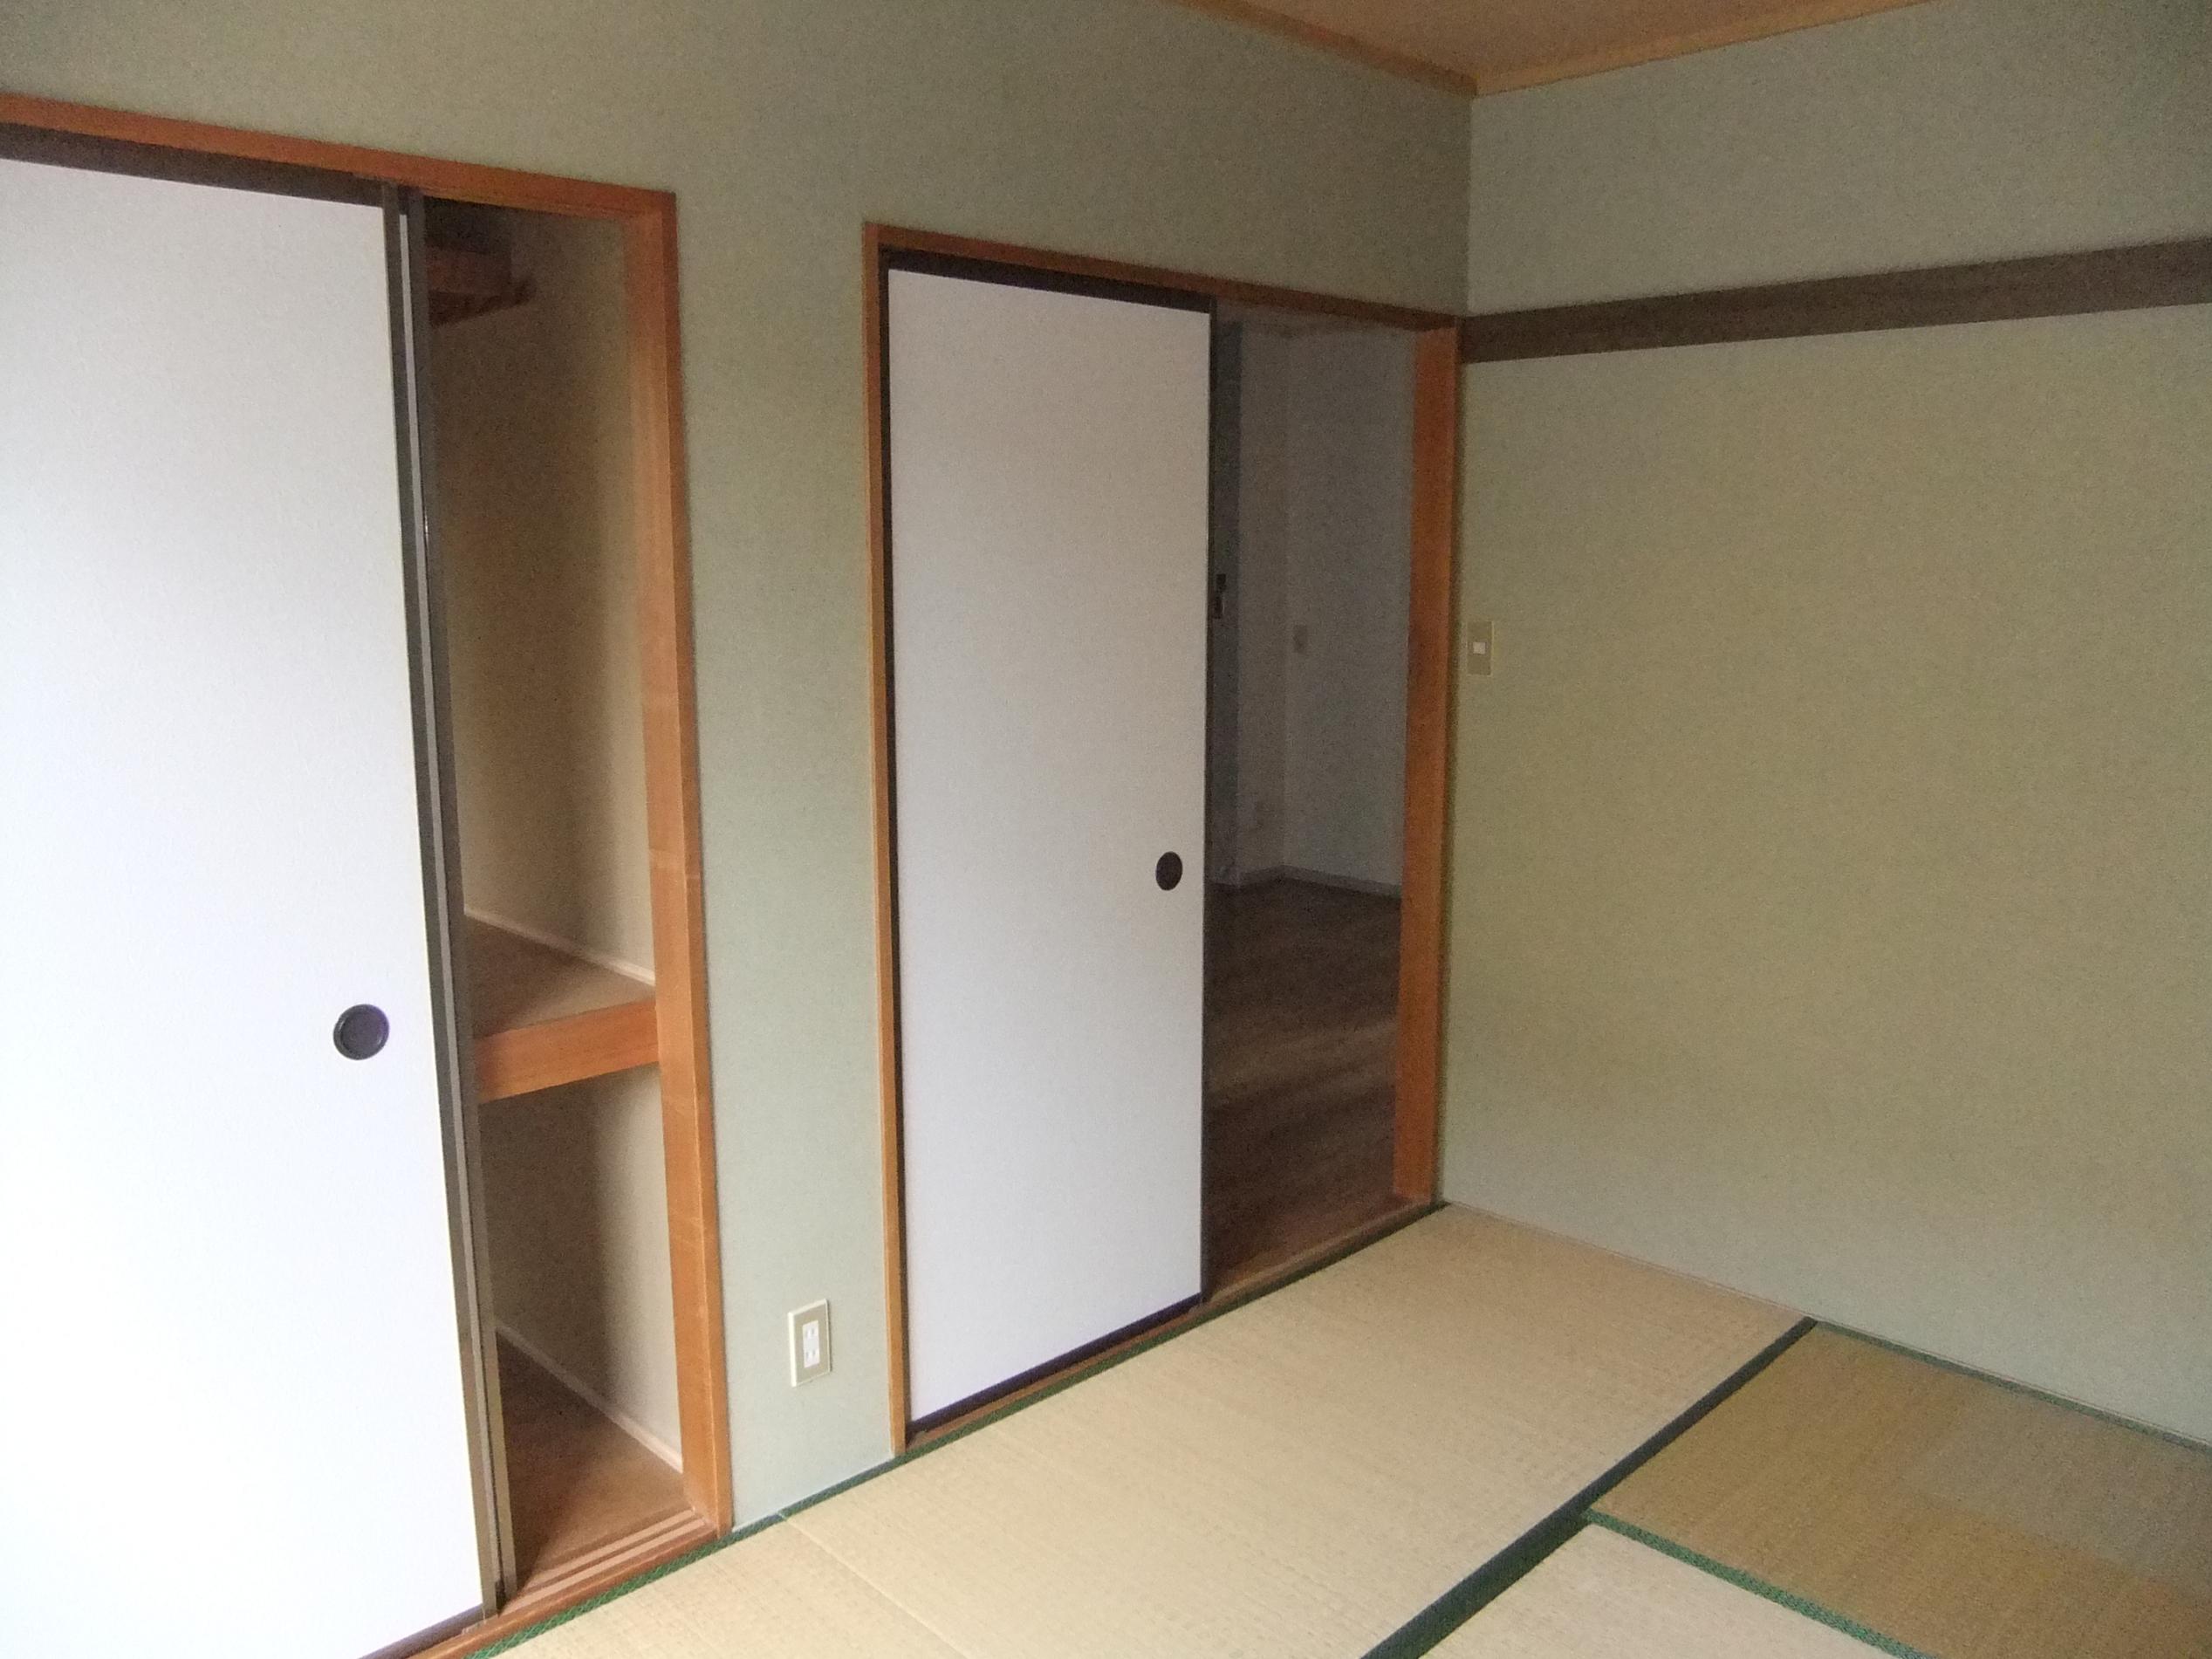 Living and room. The left side of the Japanese-style room from the window side from the kitchen